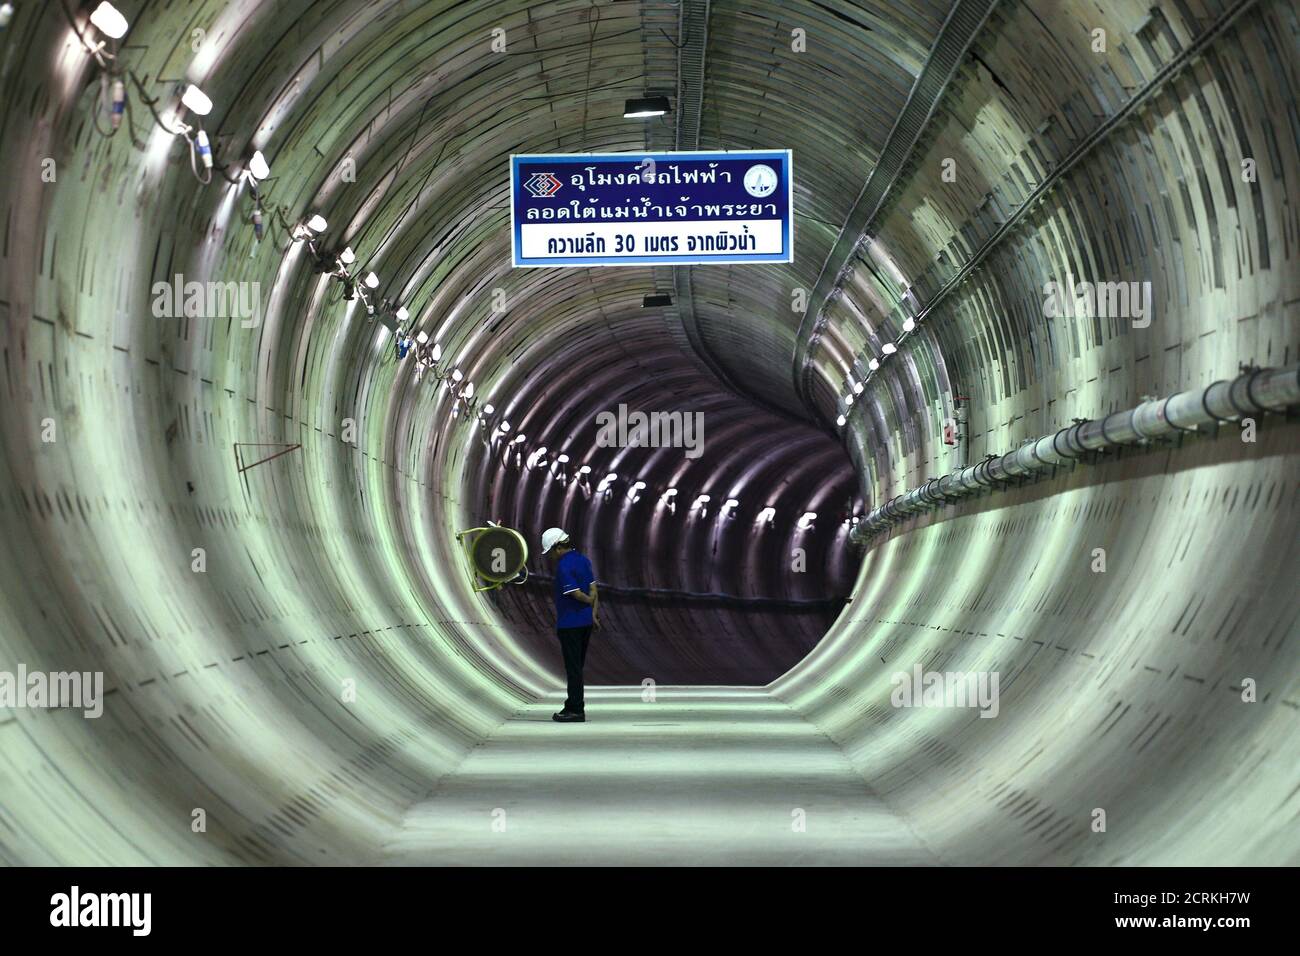 A construction worker stands inside a tunnel under the Chao Phraya river at a Mass Rapid Transit subway station in Bangkok, Thailand, December 14, 2015. REUTERS/Athit Perawongmetha Stock Photo